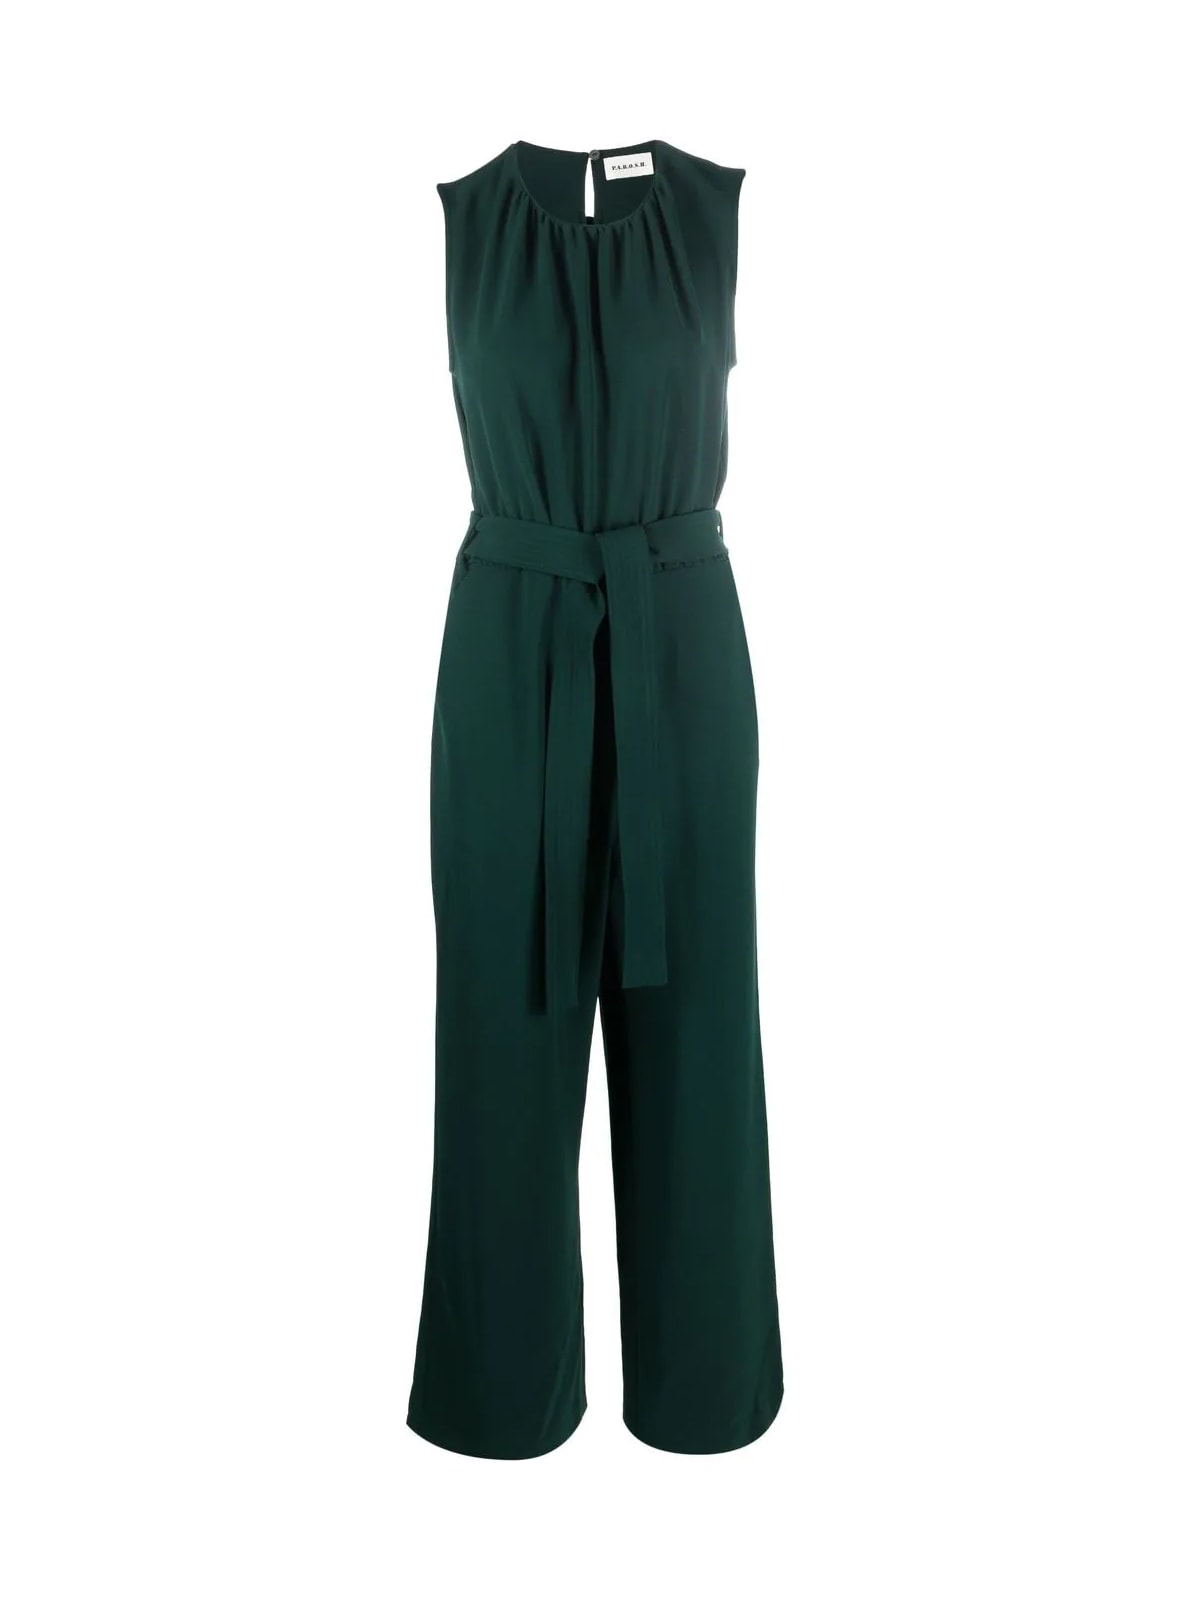 P.A.R.O.S.H SLEVELESS JUMPSUIT